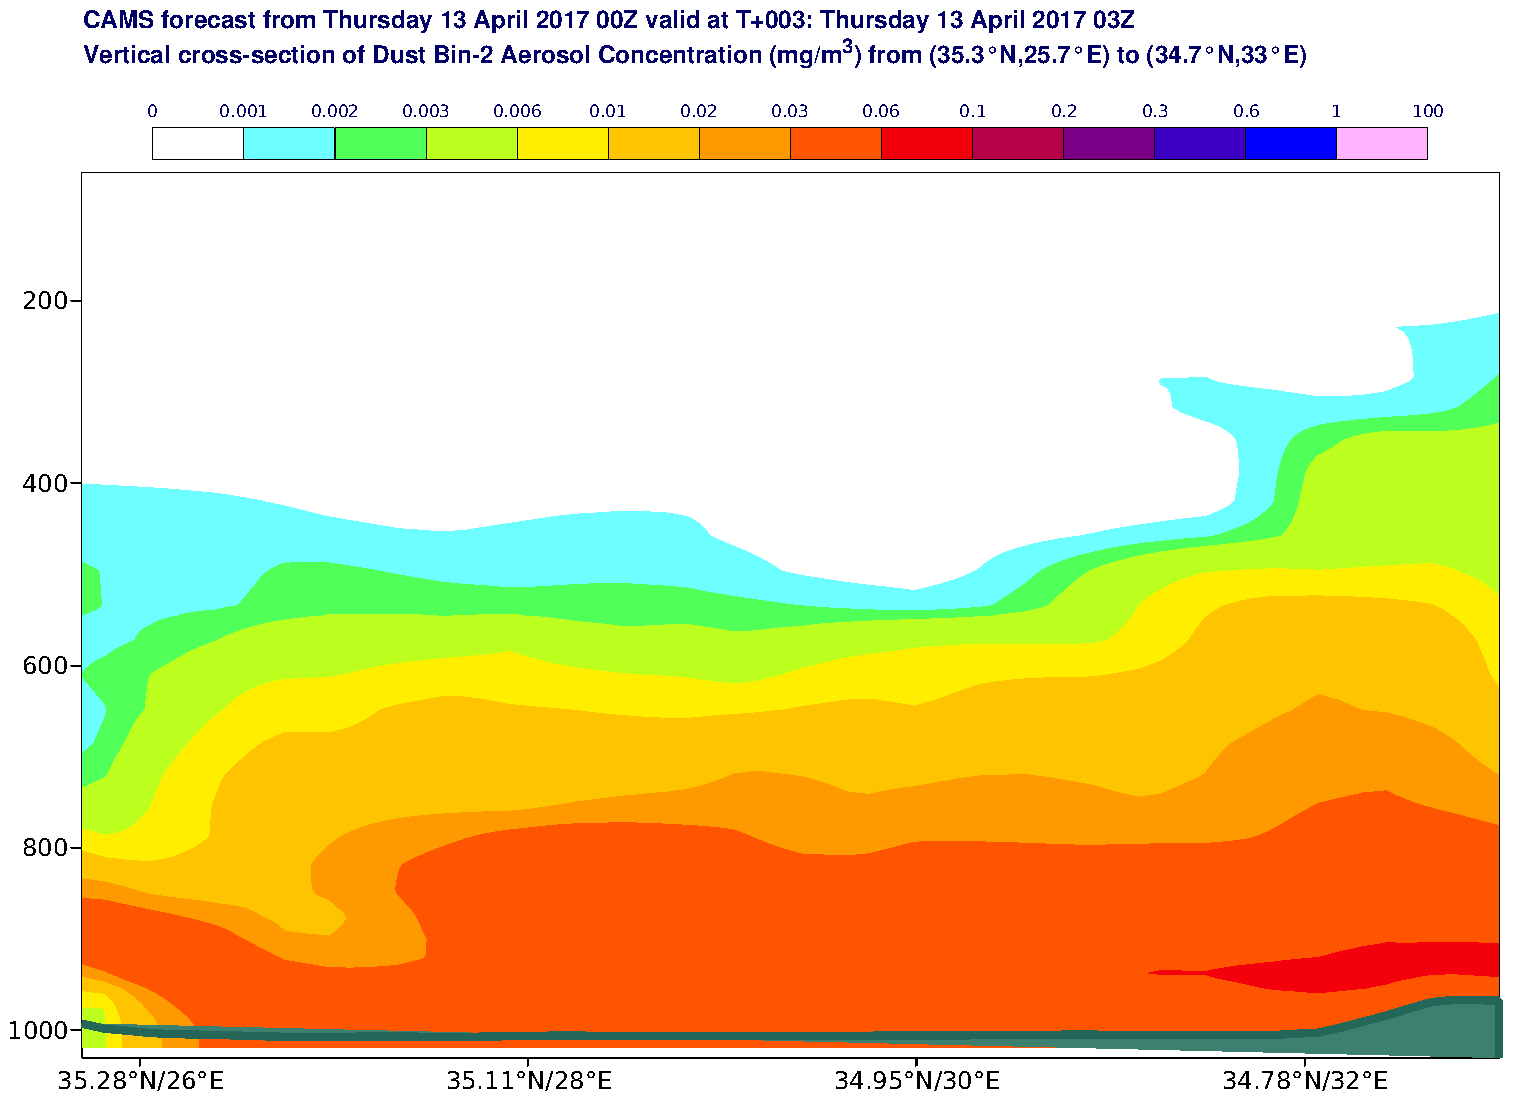 Vertical cross-section of Dust Bin-2 Aerosol Concentration (mg/m3) valid at T3 - 2017-04-13 03:00